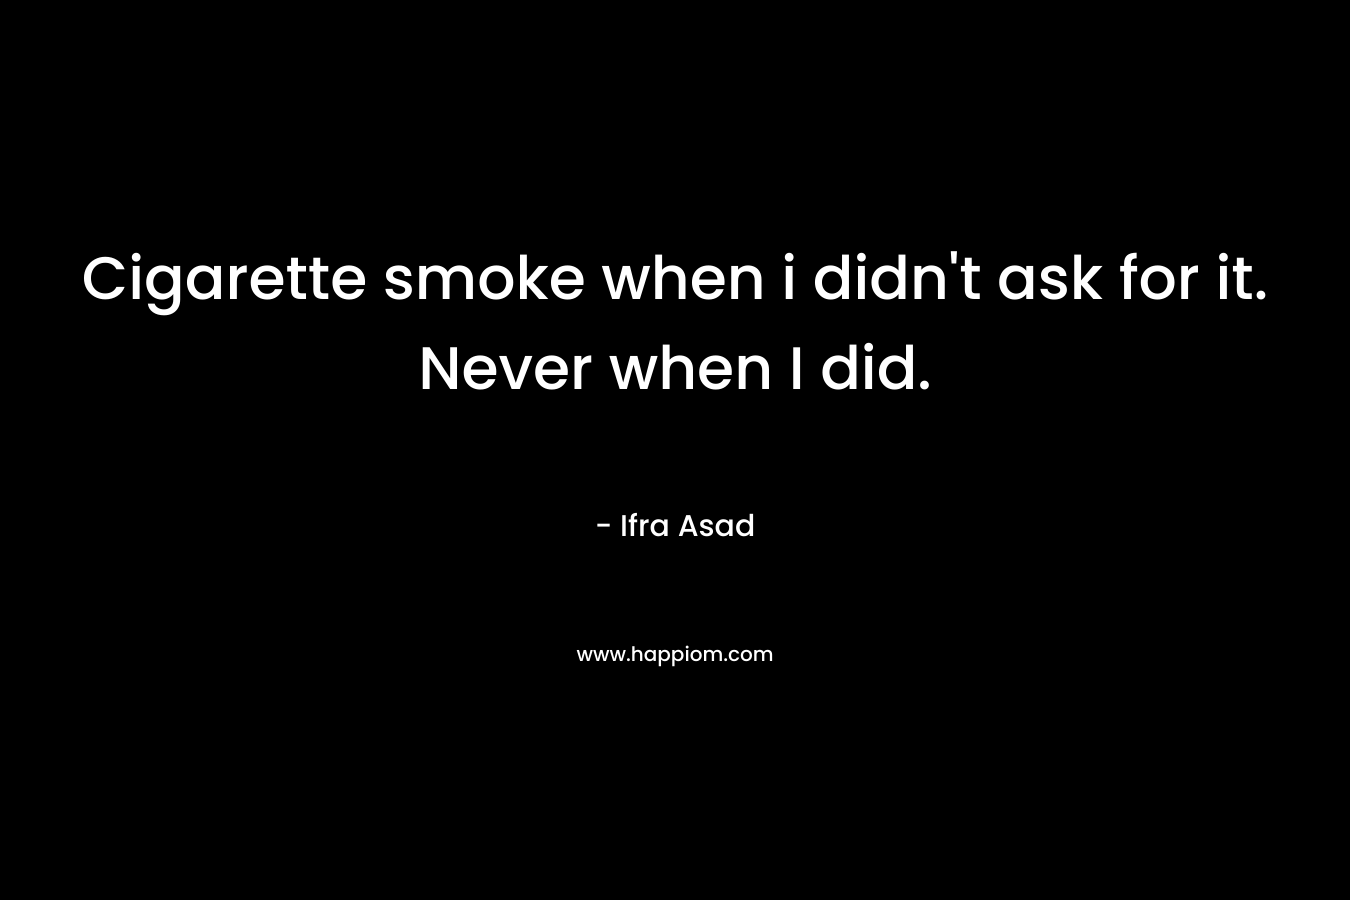 Cigarette smoke when i didn’t ask for it. Never when I did. – Ifra Asad